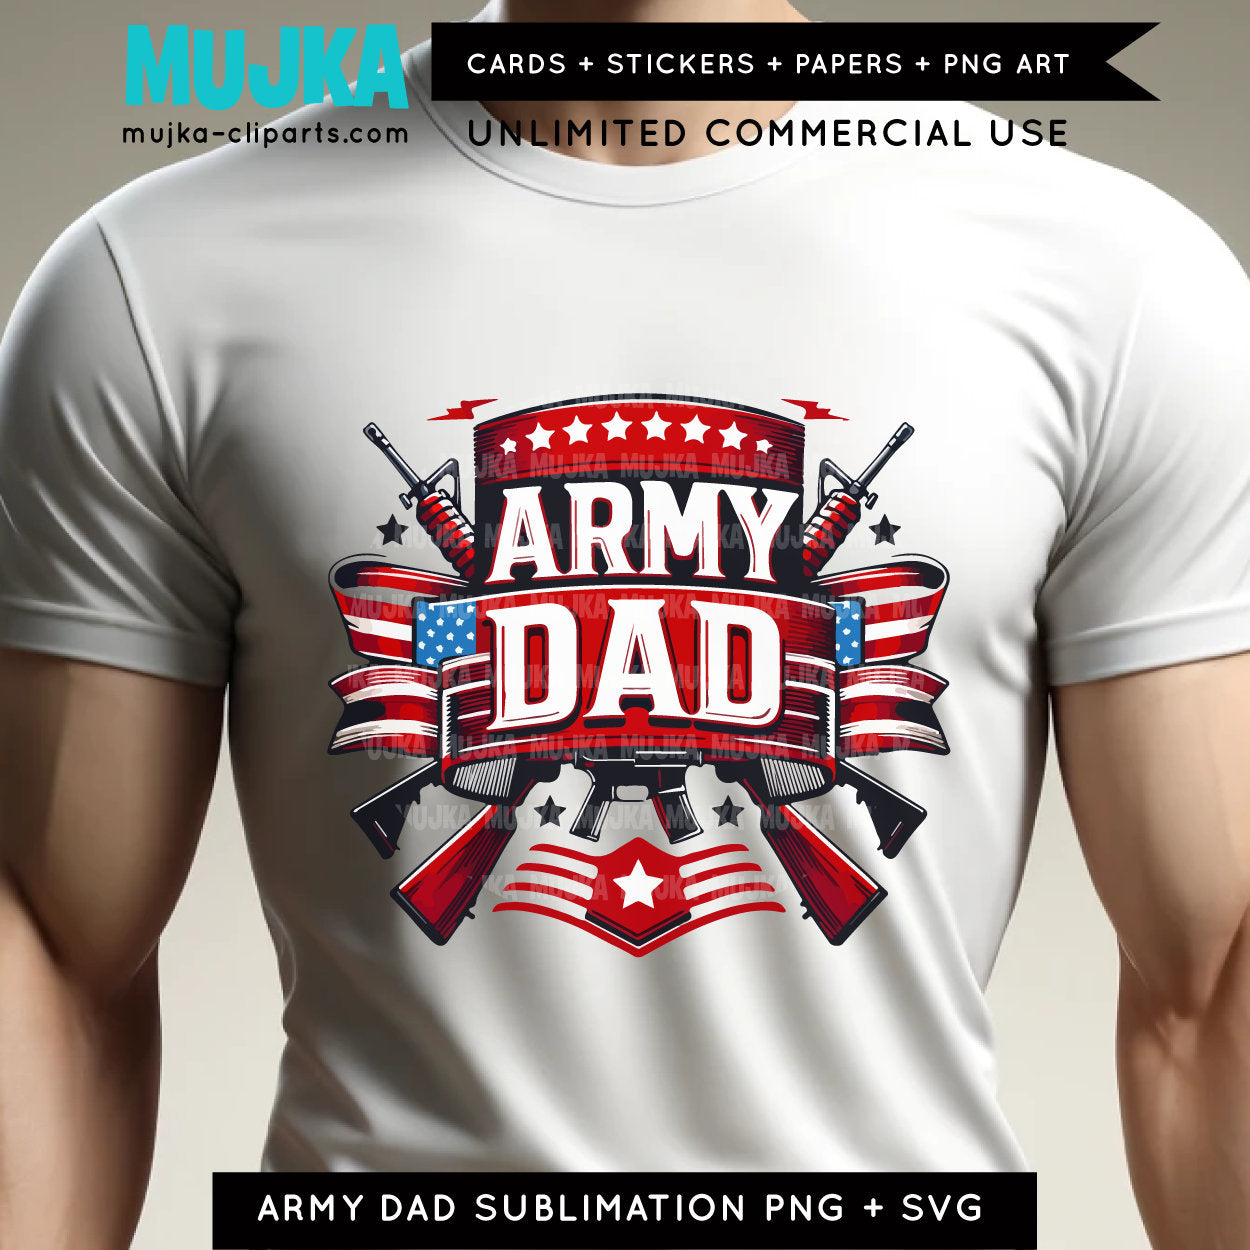 Proud Army Dad PNG SVG, Armed And Dadly Png, Fathers Day Gift, Army sublimation designs, US Soldier Tshirt Designs, Army graphics, printable